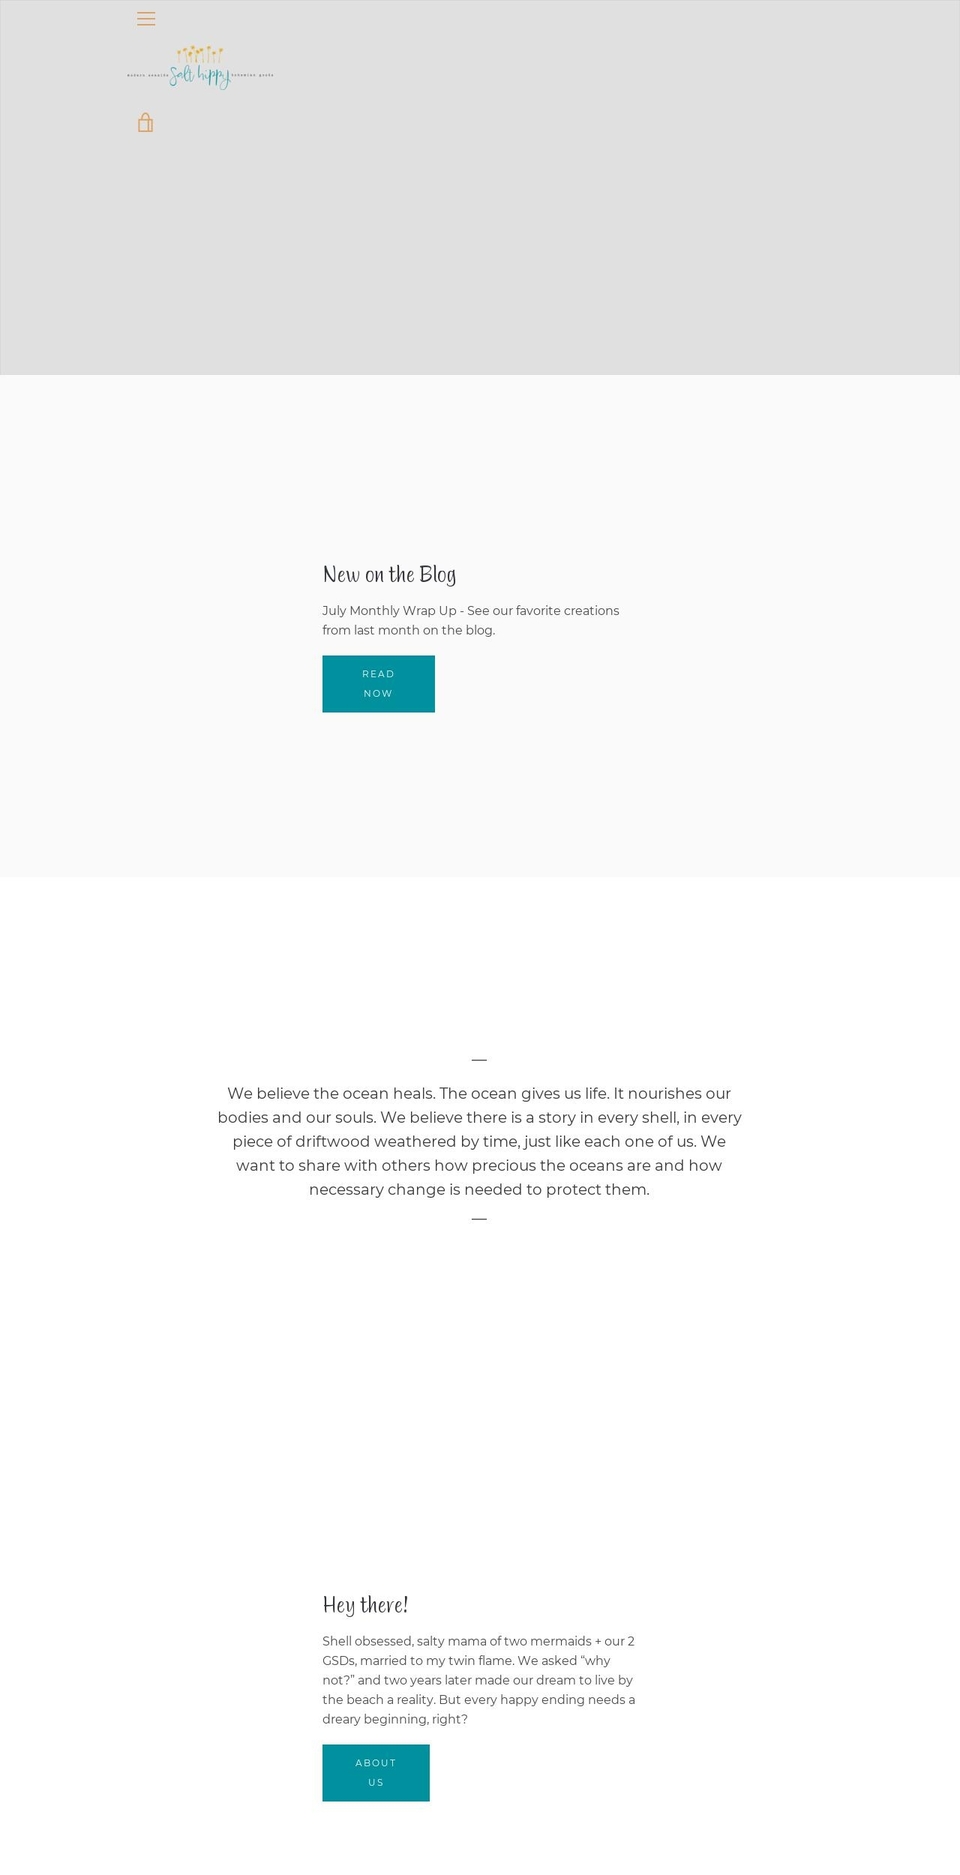 Narrative with Installments message Shopify theme site example salthippy.com